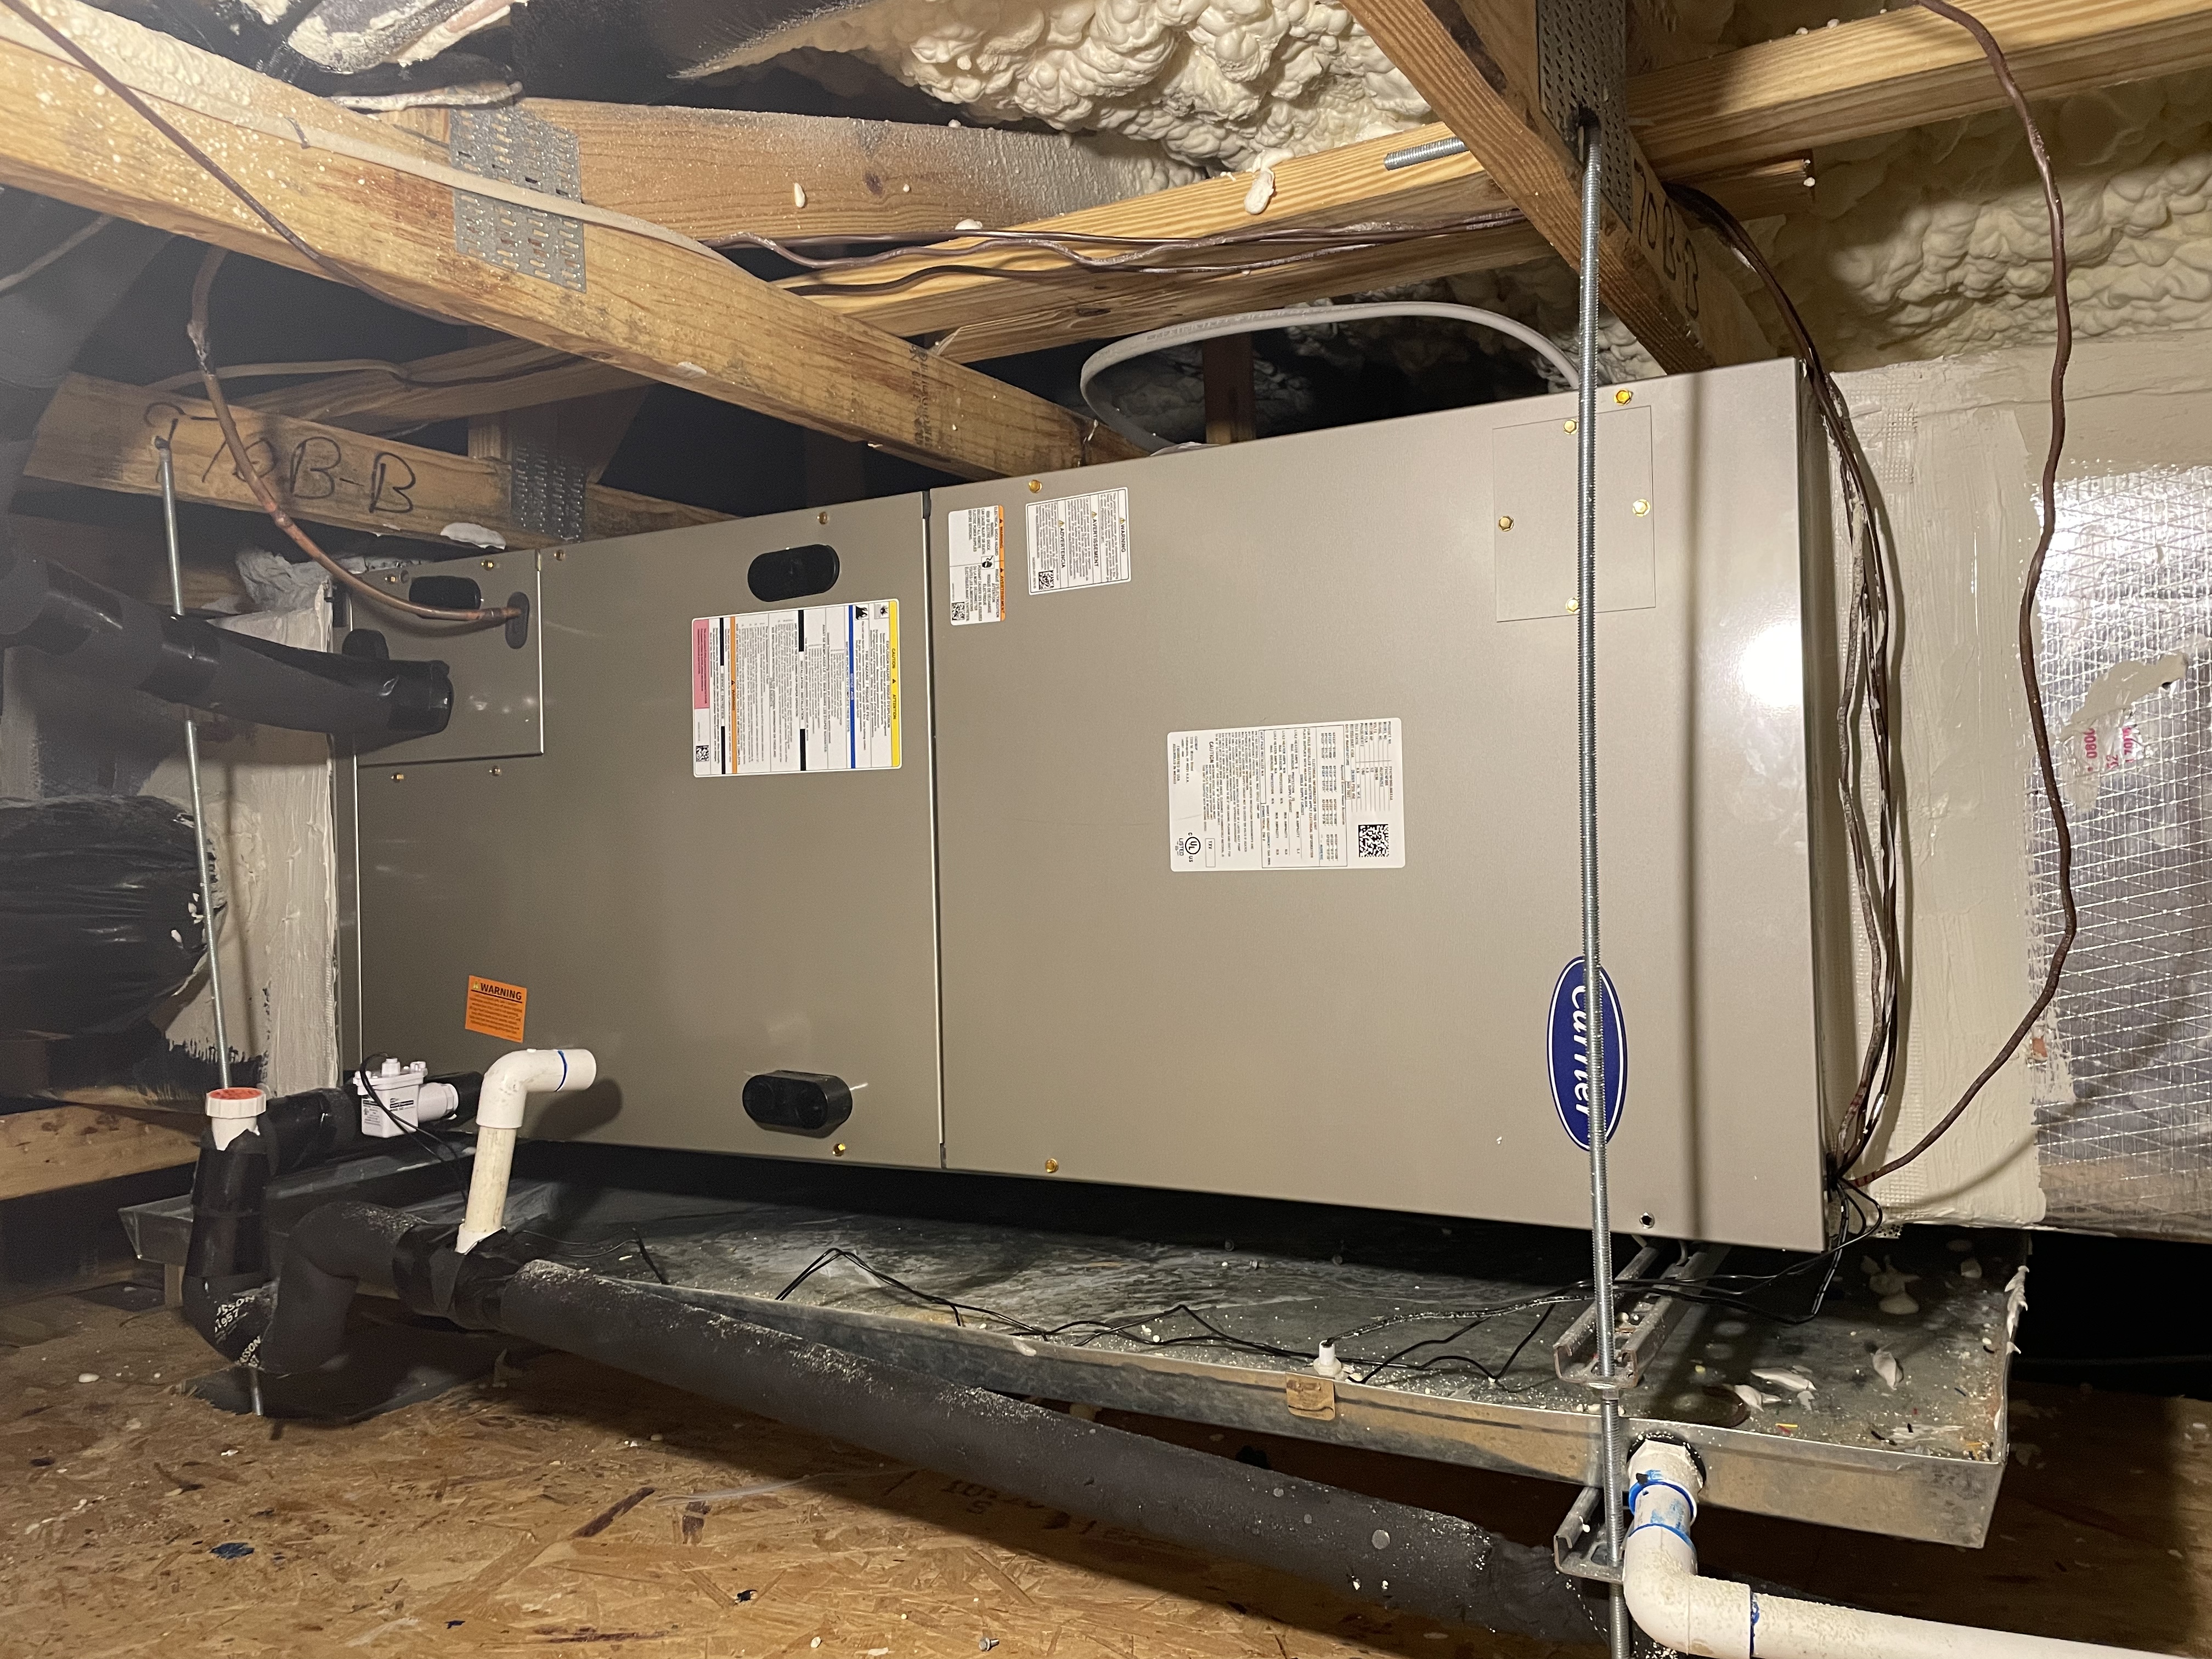 Lennox AHU Removal and Replacement with Carrier AHU